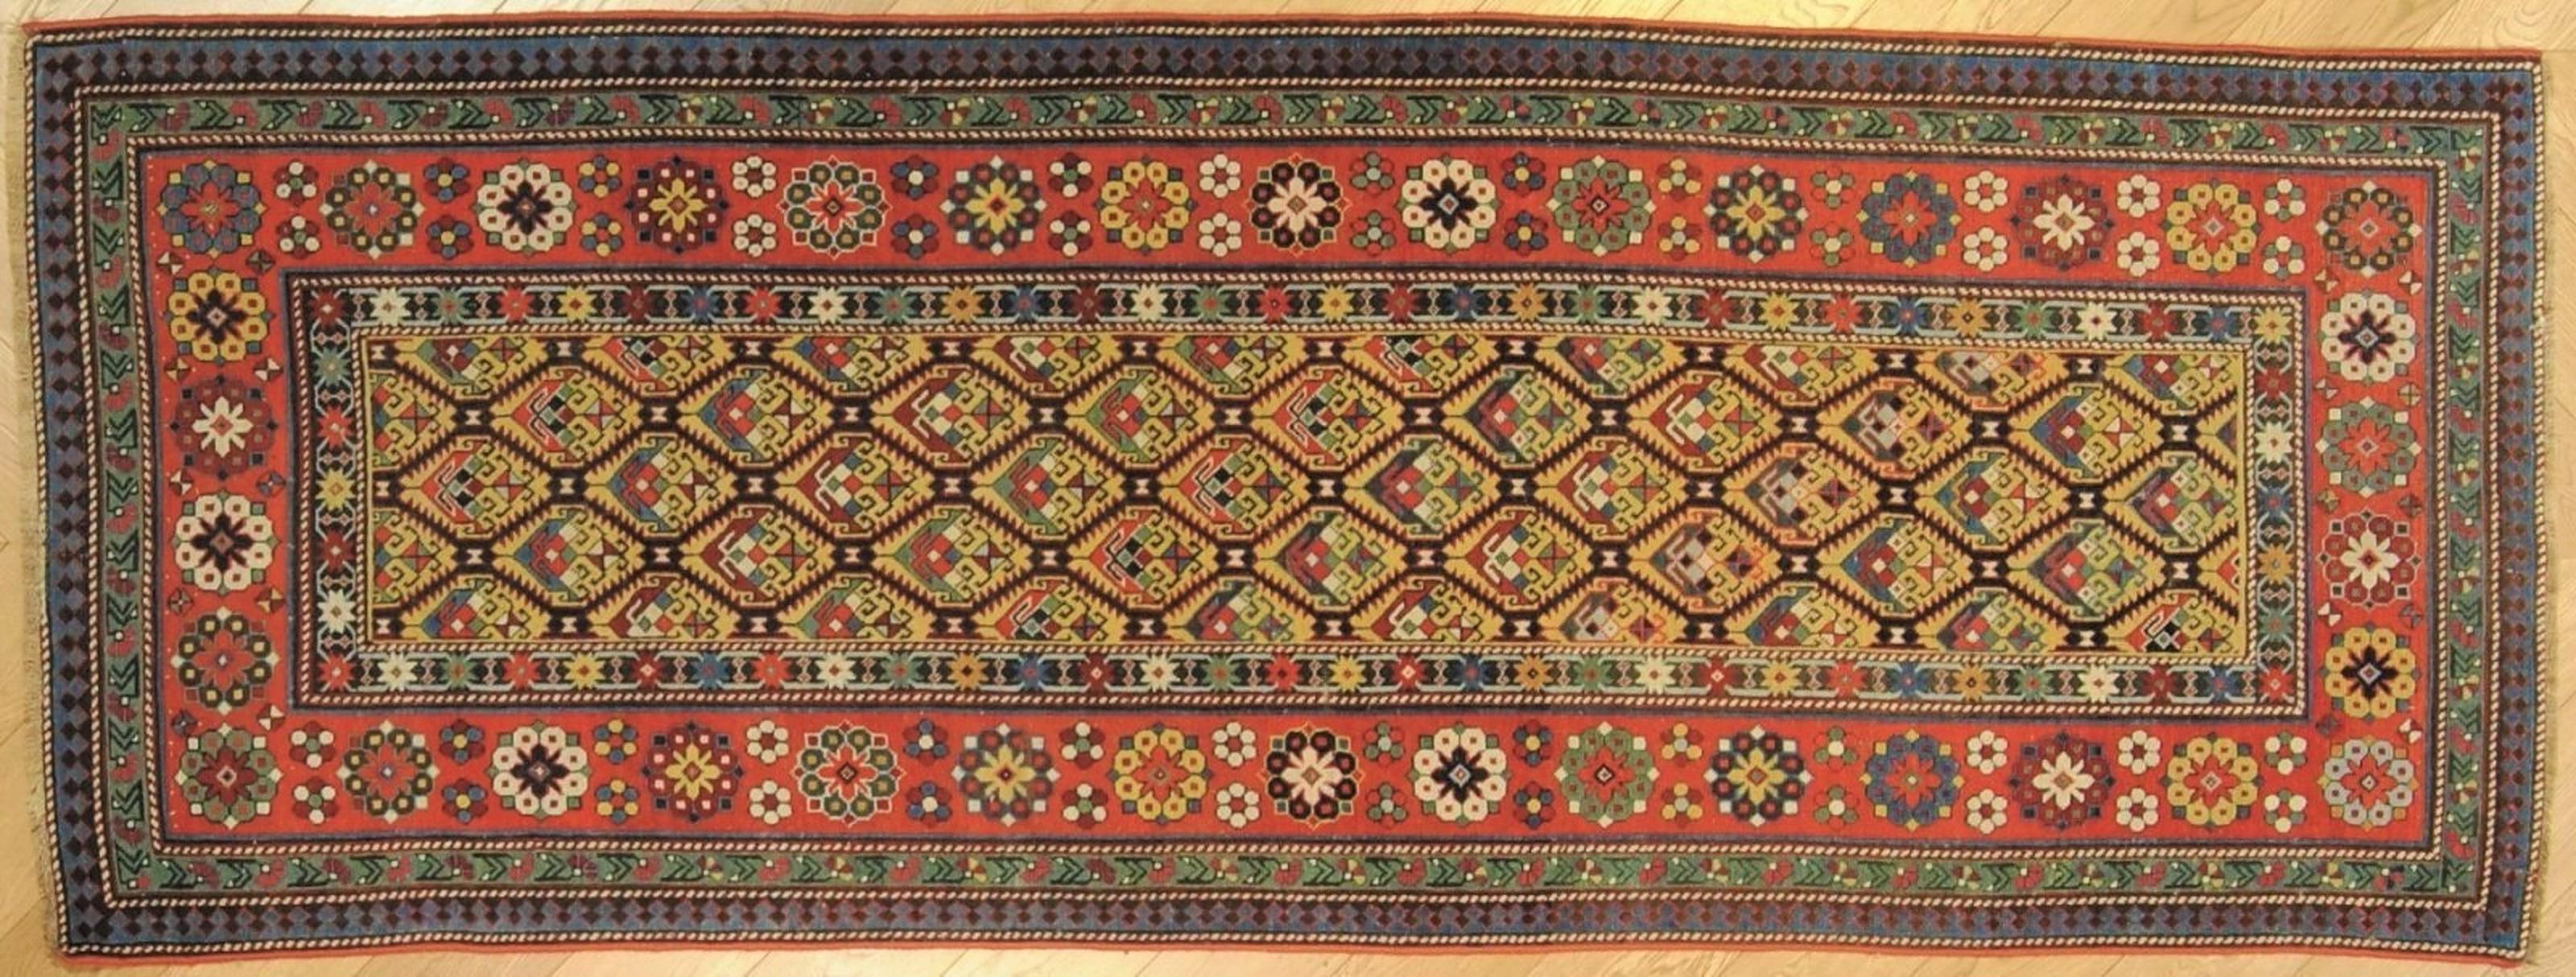 The territory of Talish is located in the southeastern part of the Caucasus, near the Caspian Sea, on the border with Persia. The main features of Talish carpets are the elongated size and a relatively narrow central field, often as wide as the